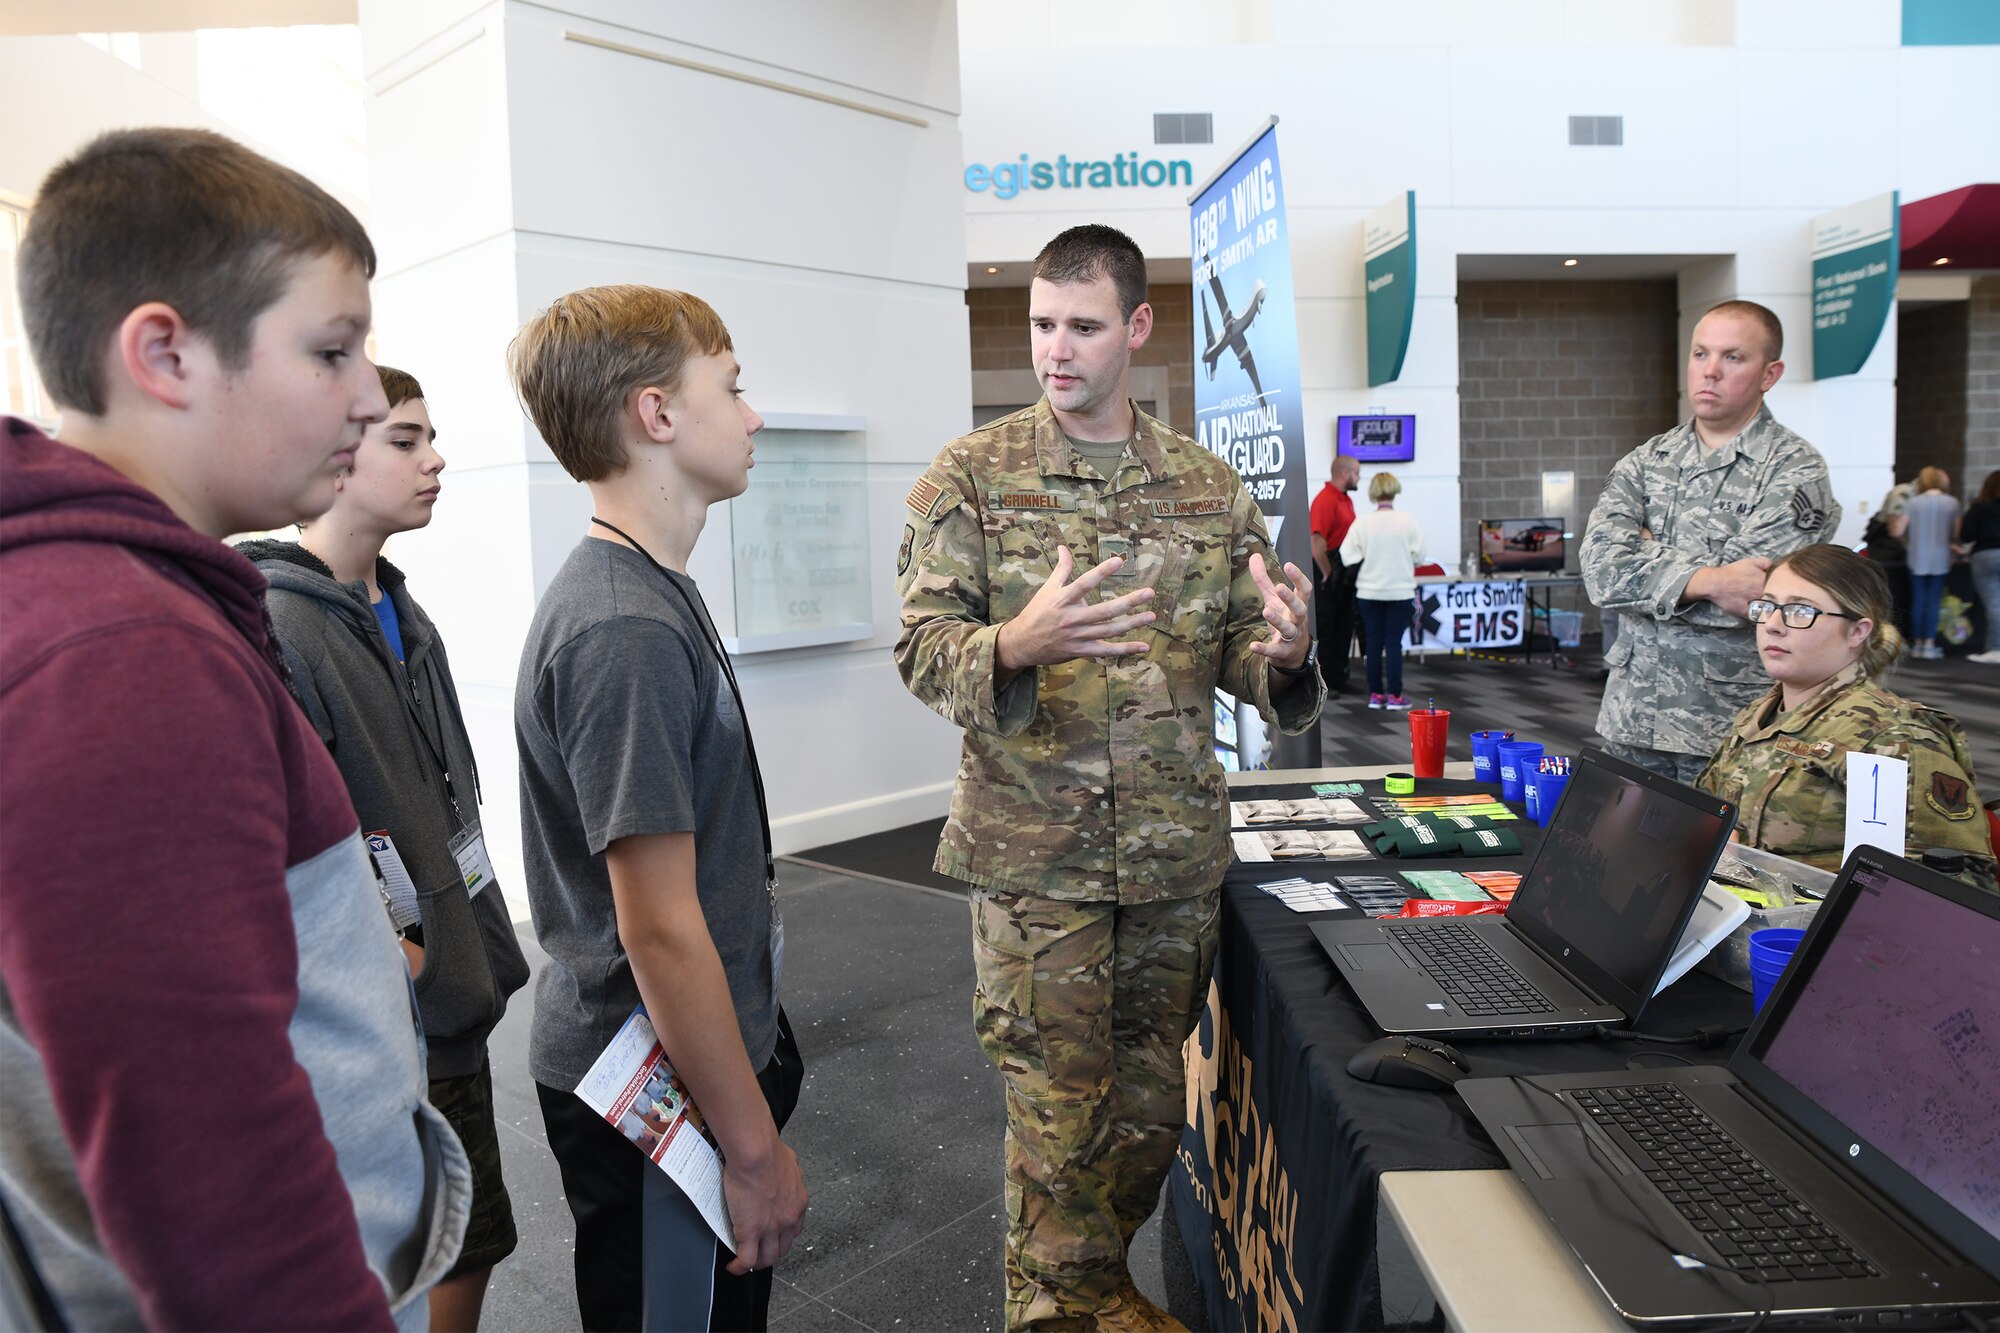 Staff Sgt. Ryan Grinnell, an intelligence analyst with the 123rd Intelligence Squadron, demonstrates a computer simulation of an intelligence, surveillance, and reconnaissance mission to area junior high students at the Fort Smith Public Schools’ ICan Career Expo, held Oct. 22, 2019, in Fort Smith, Arkansas. The 188th Wing’s mission combines ISR, remotely piloted aircraft and targeting to serve state and national military objectives. (U.S. Air National Guard photo by Tech. Sgt. John E. Hillier)